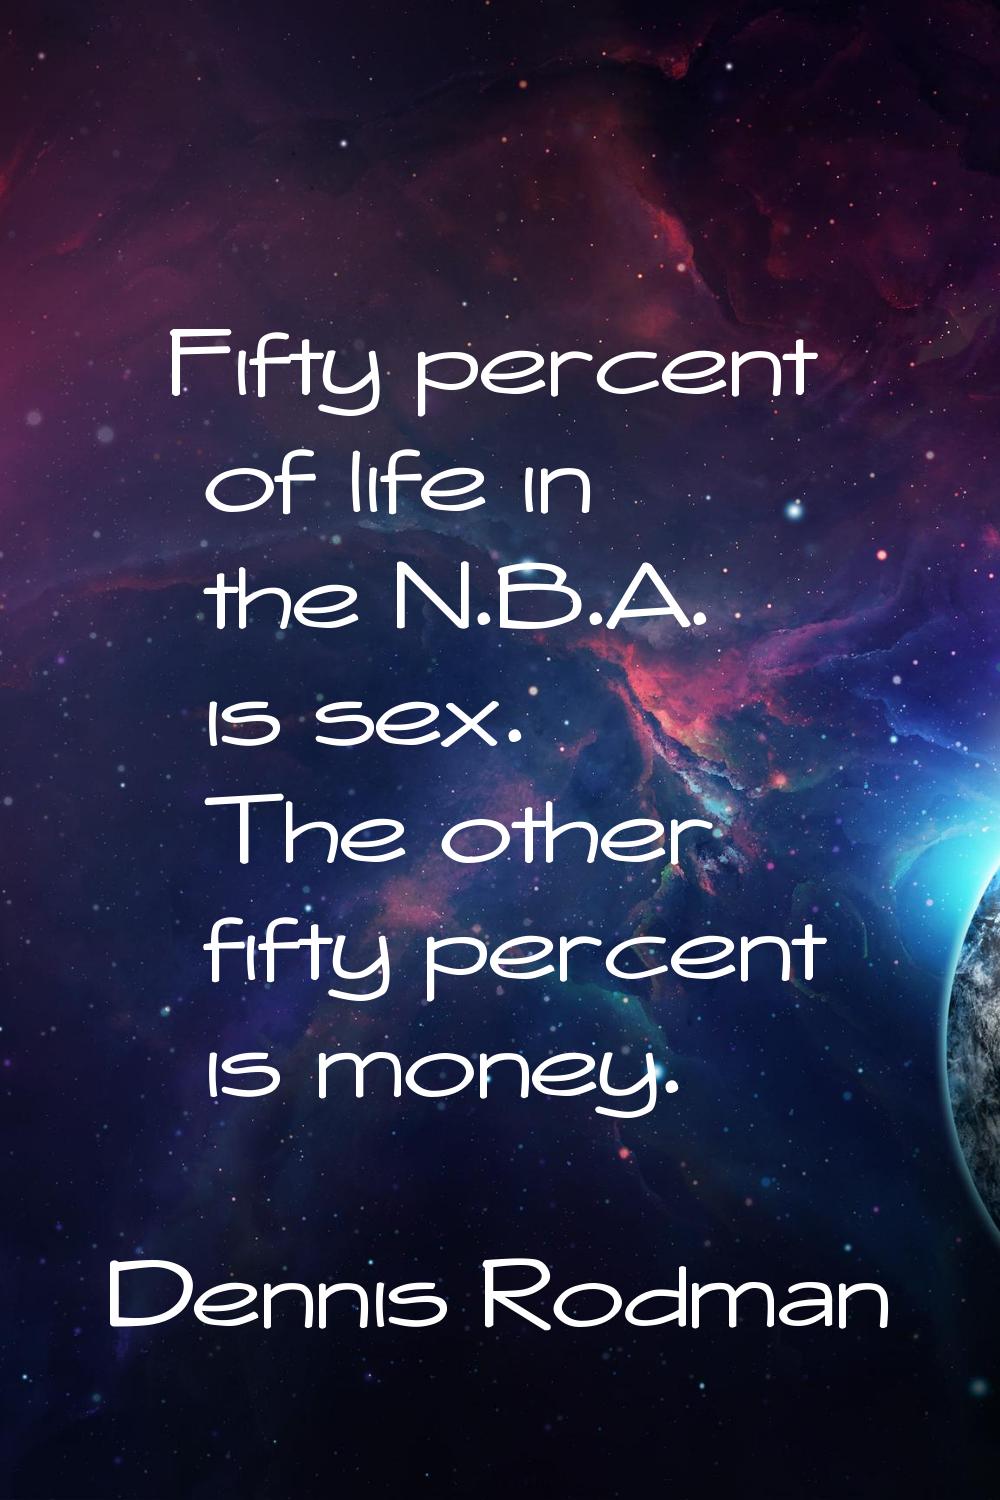 Fifty percent of life in the N.B.A. is sex. The other fifty percent is money.